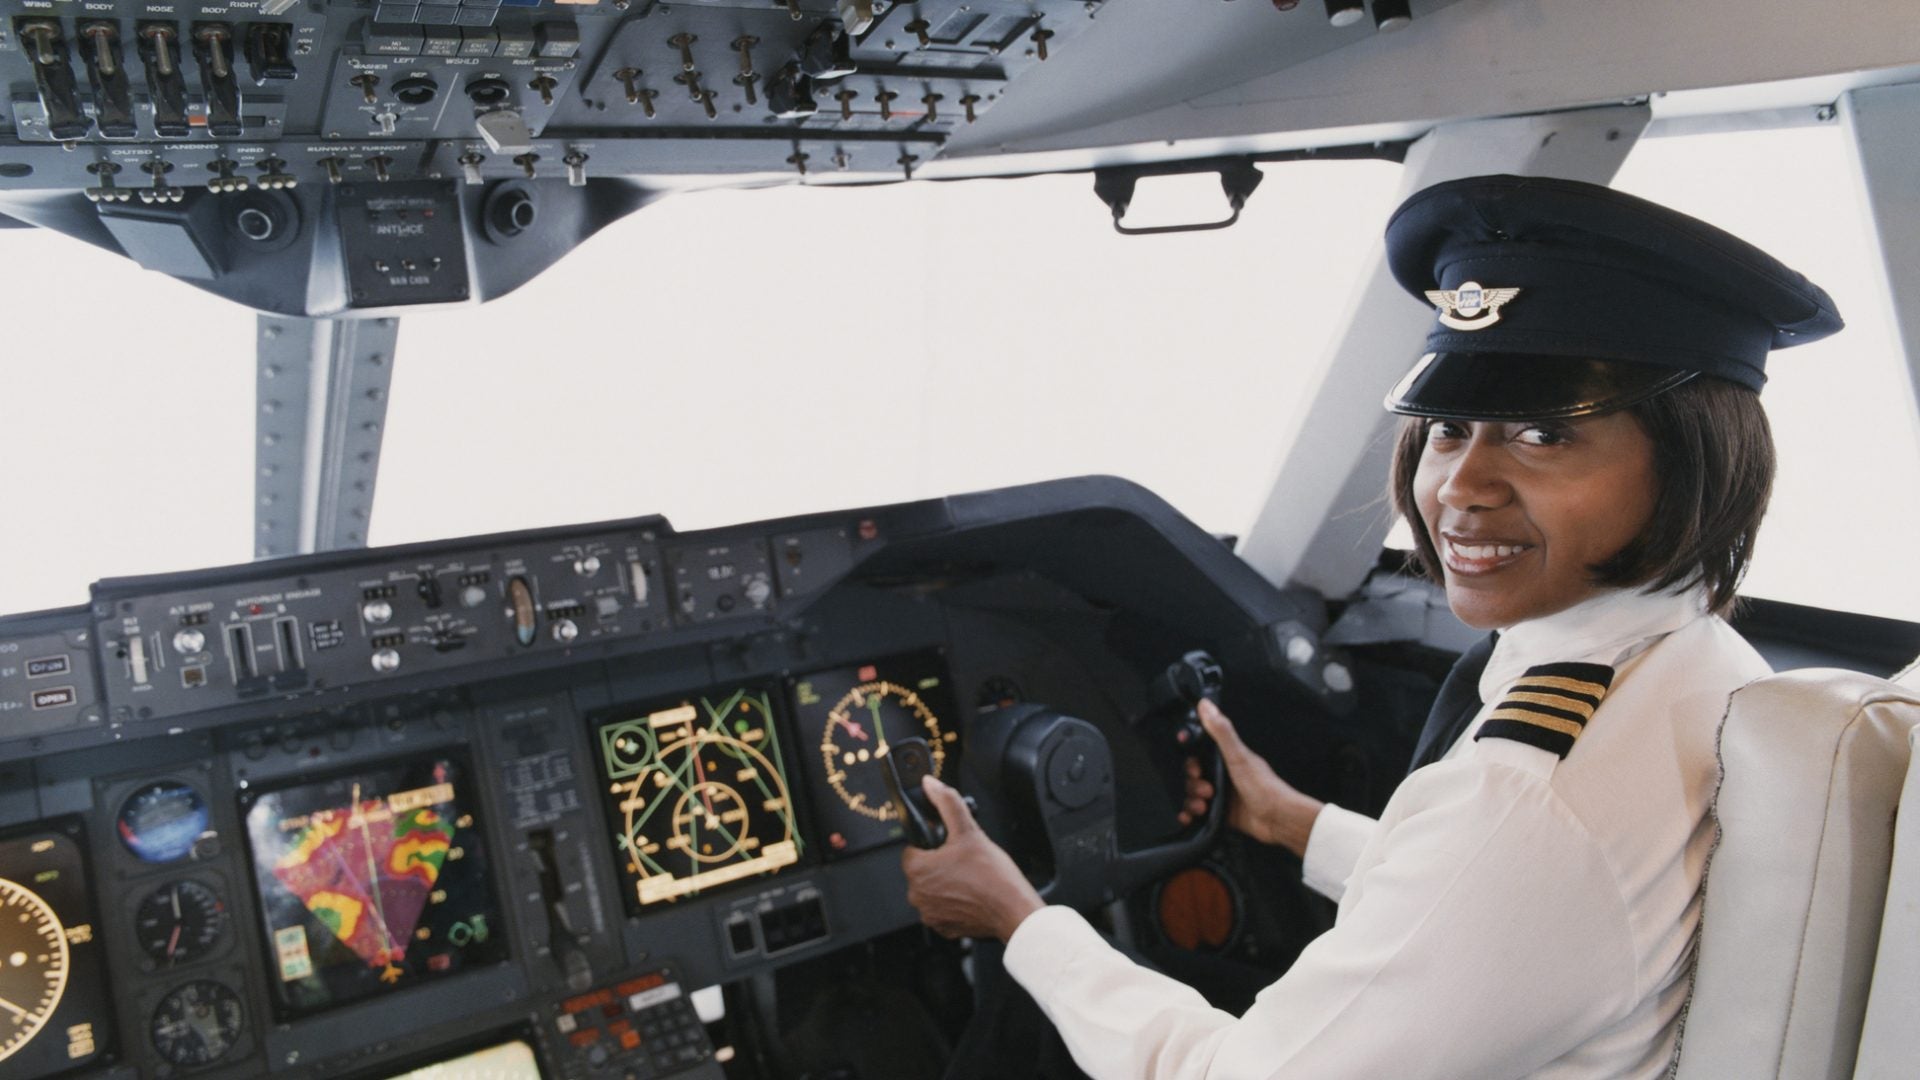 Boeing Investing Almost A Million Dollars In Scholarships To Increase Diversity Of Commercial Pilots